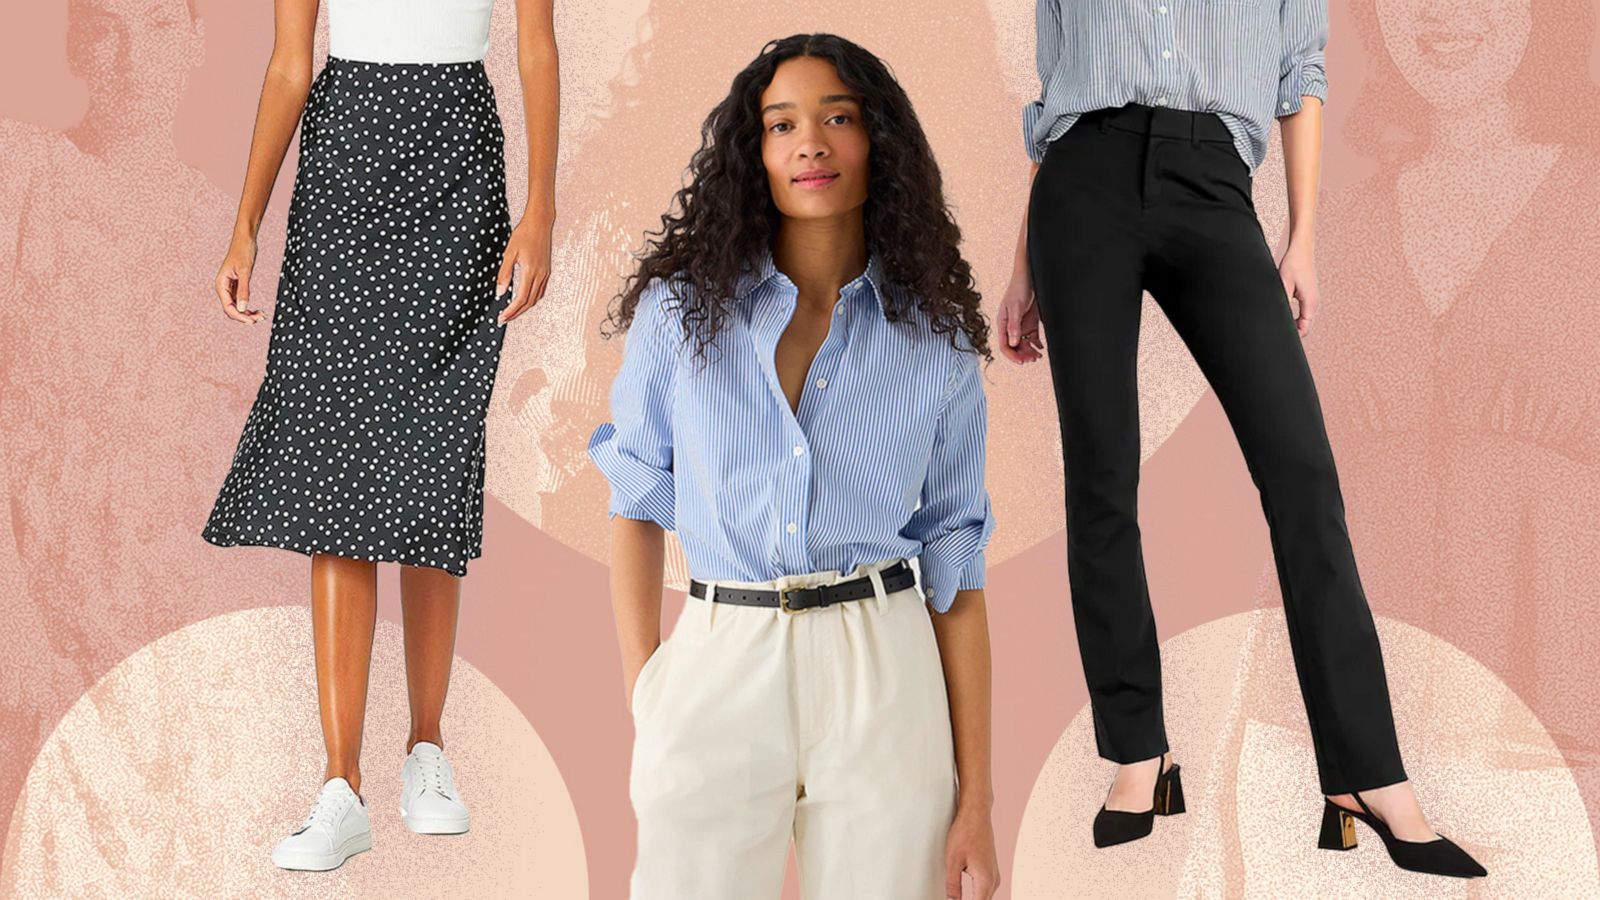 Shop blouses, skirts, pants and more workwear for women - Good